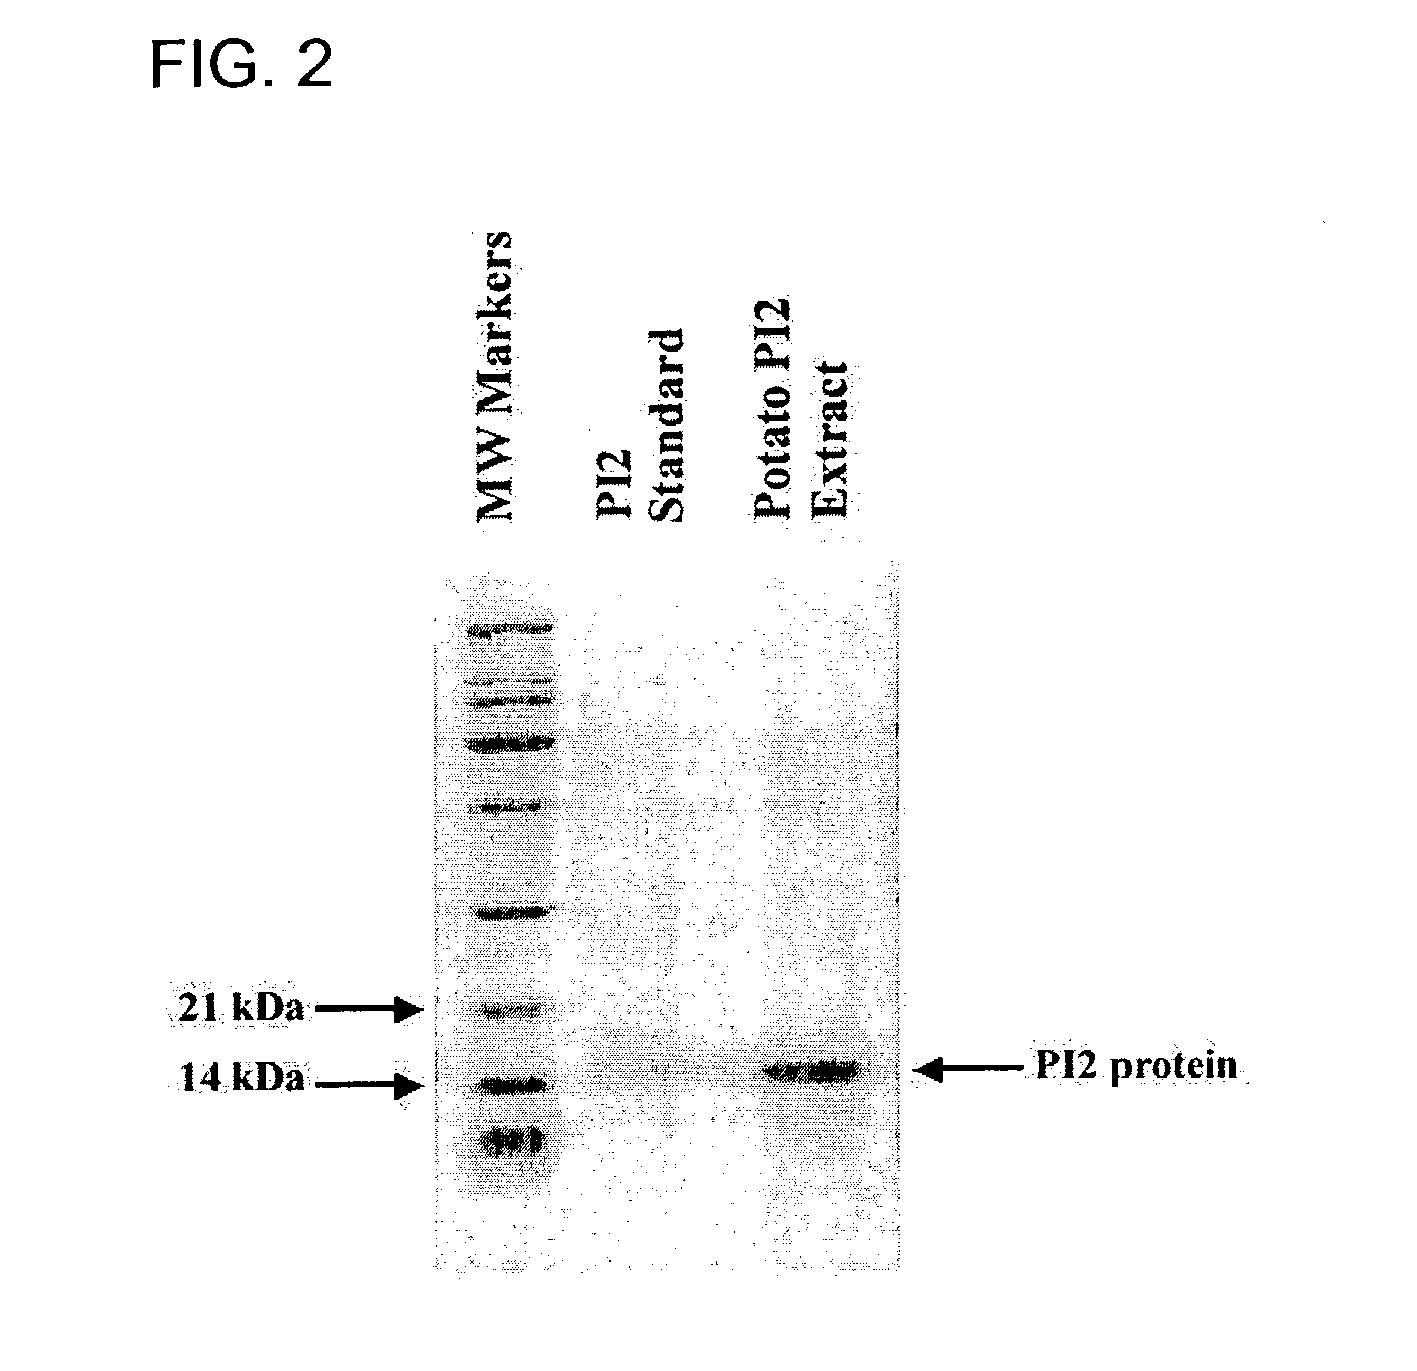 Composition and method for reducing post-prandial blood glucose